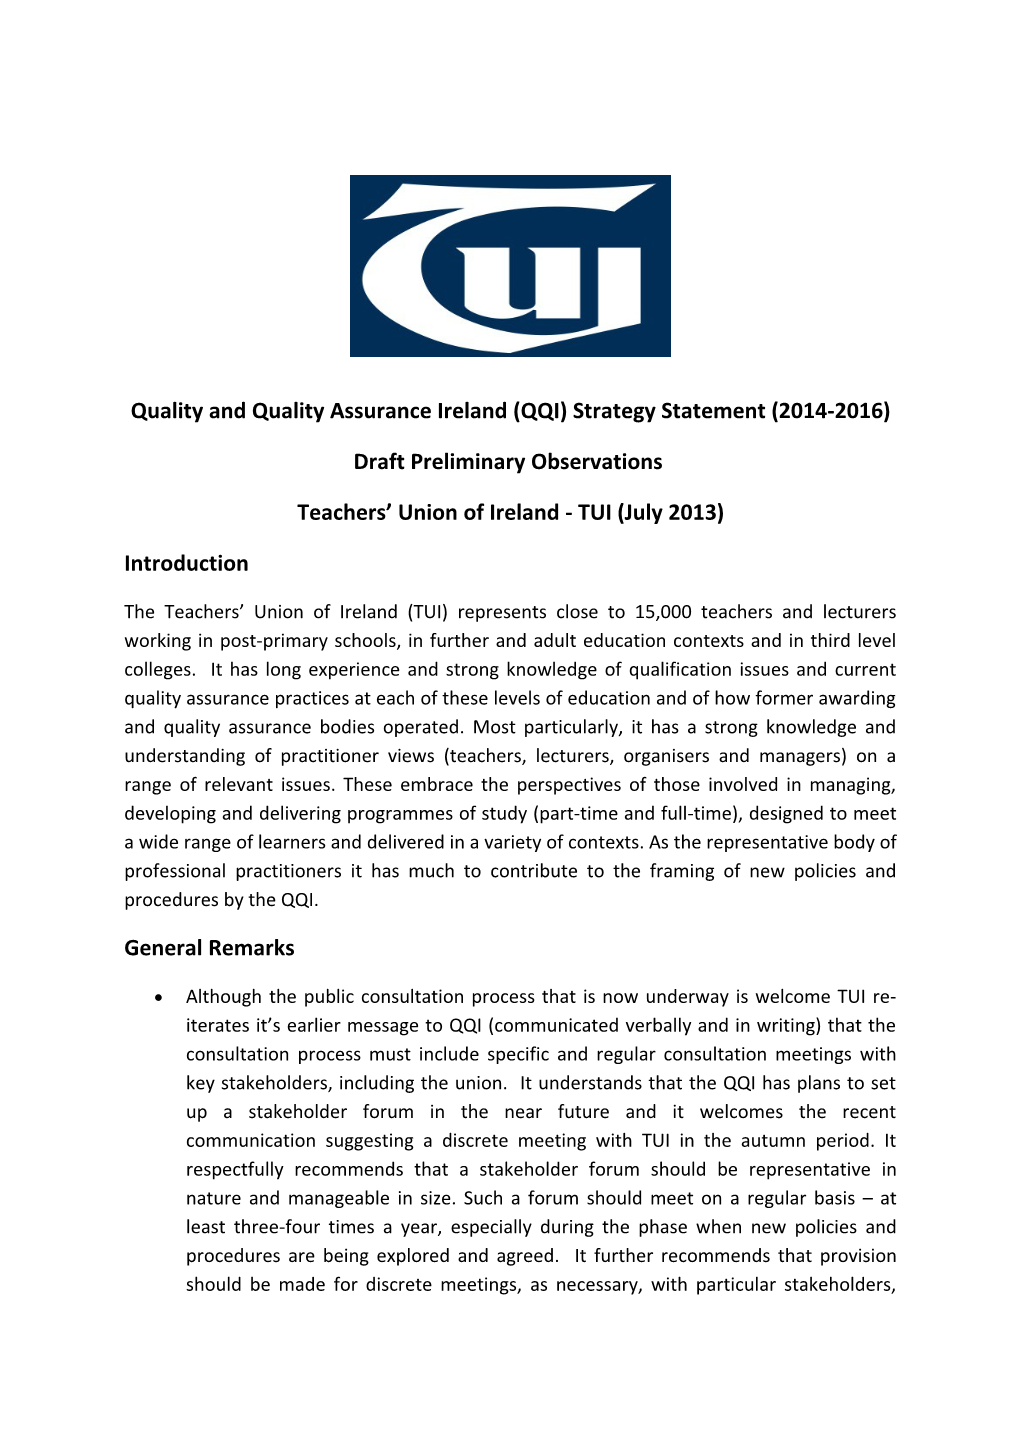 Quality and Quality Assurance Ireland (QQI)Strategy Statement (2014-2016)